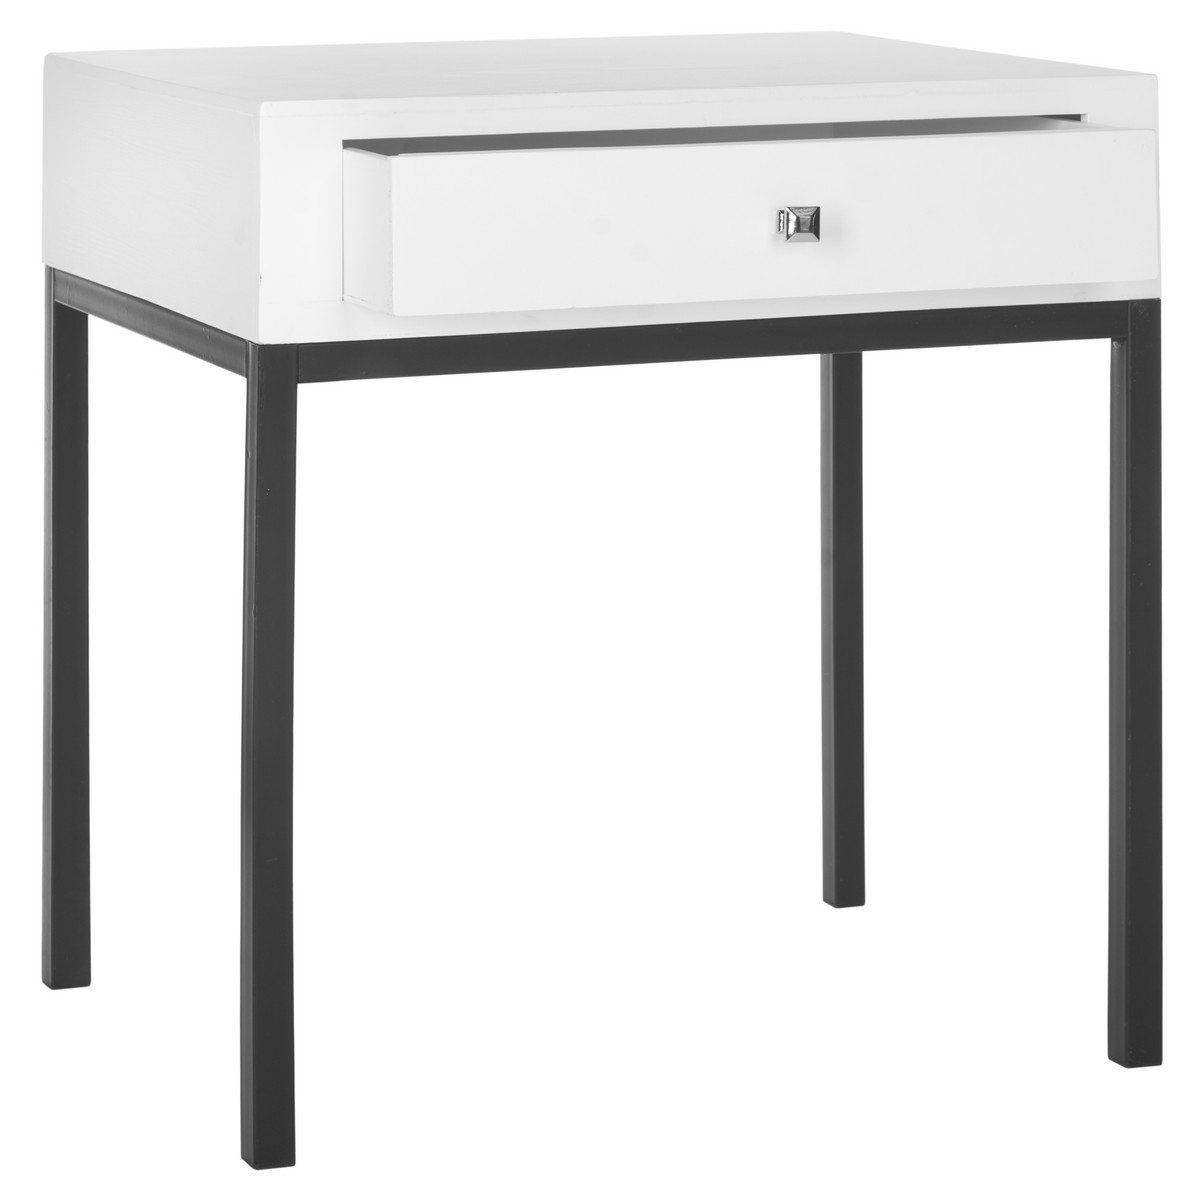 Adena End Table With Storage Drawer - White - Arlo Home - Image 1